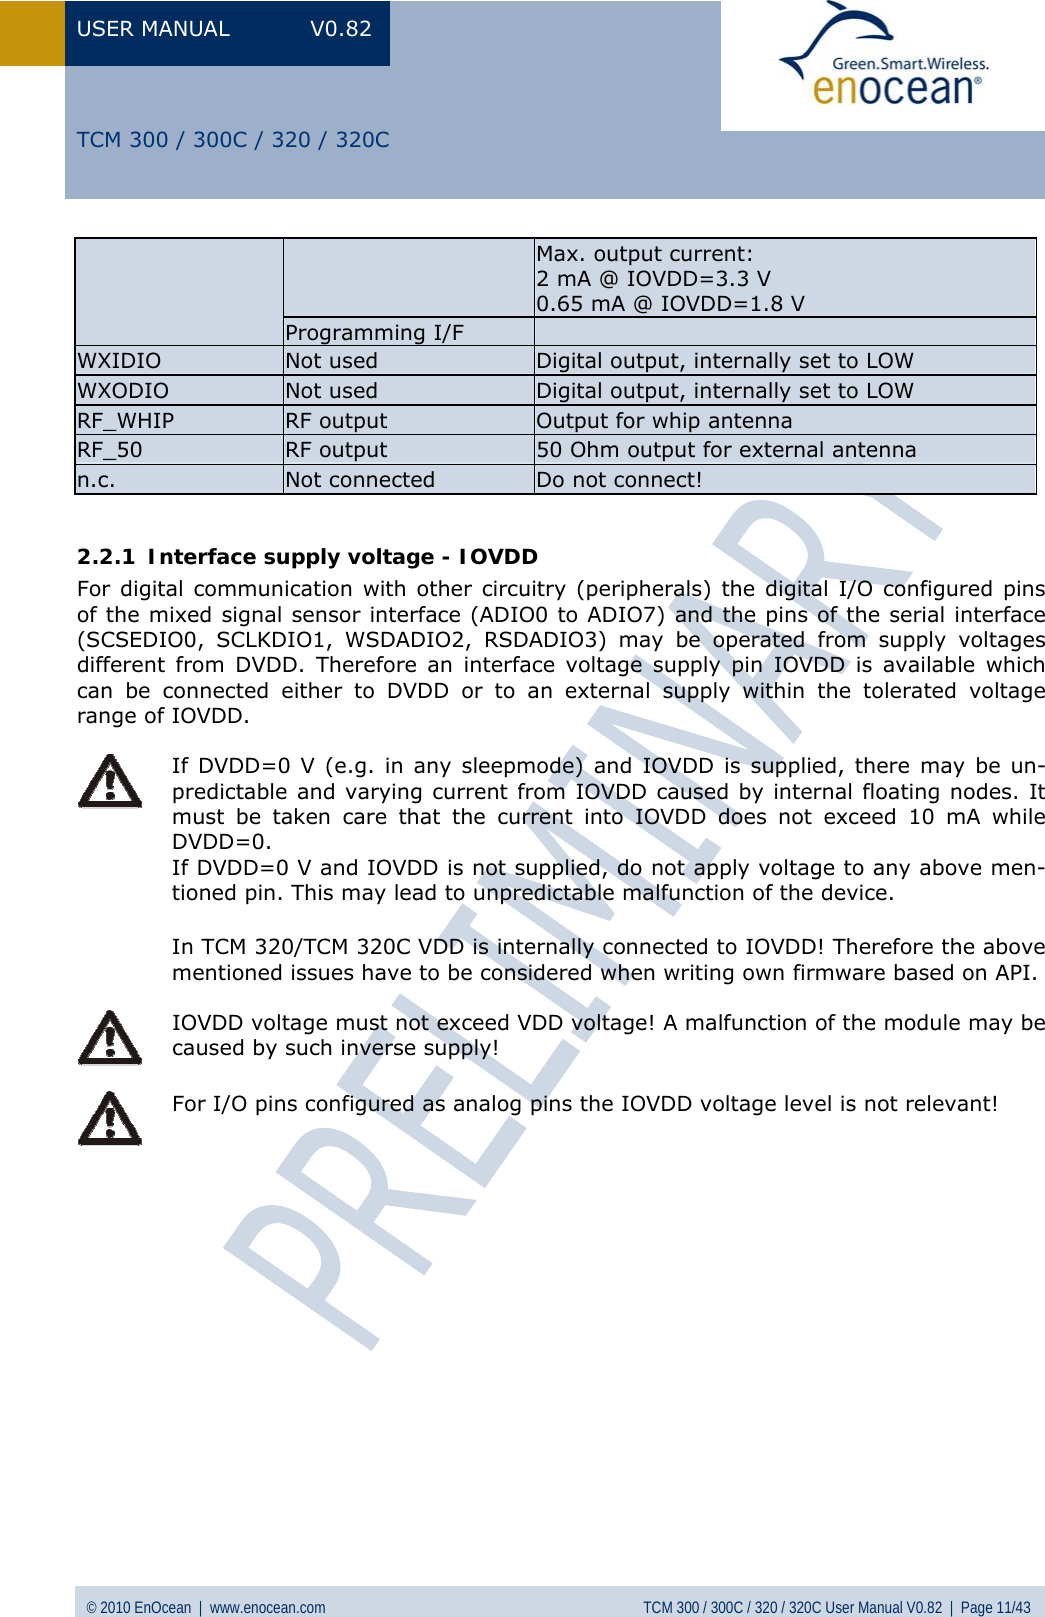 USER MANUAL V0.82 © 2010 EnOcean  |  www.enocean.com  TCM 300 / 300C / 320 / 320C User Manual V0.82  |  Page 11/43   TCM 300 / 300C / 320 / 320C Max. output current:  2 mA @ IOVDD=3.3 V 0.65 mA @ IOVDD=1.8 V Programming I/F   WXIDIO  Not used  Digital output, internally set to LOW WXODIO  Not used  Digital output, internally set to LOW RF_WHIP  RF output  Output for whip antenna RF_50  RF output  50 Ohm output for external antenna n.c.  Not connected  Do not connect!  2.2.1 Interface supply voltage - IOVDD For digital communication with other circuitry (peripherals) the digital I/O configured pins of the mixed signal sensor interface (ADIO0 to ADIO7) and the pins of the serial interface (SCSEDIO0, SCLKDIO1, WSDADIO2, RSDADIO3) may be operated from supply voltages different from DVDD. Therefore an interface voltage supply pin IOVDD is available which can be connected either to DVDD or to an external supply within the tolerated voltage range of IOVDD.   If DVDD=0 V (e.g. in any sleepmode) and IOVDD is supplied, there may be un-predictable and varying current from IOVDD caused by internal floating nodes. It must be taken care that the current into IOVDD does not exceed 10 mA while DVDD=0. If DVDD=0 V and IOVDD is not supplied, do not apply voltage to any above men-tioned pin. This may lead to unpredictable malfunction of the device. In TCM 320/TCM 320C VDD is internally connected to IOVDD! Therefore the above mentioned issues have to be considered when writing own firmware based on API.   IOVDD voltage must not exceed VDD voltage! A malfunction of the module may be caused by such inverse supply!   For I/O pins configured as analog pins the IOVDD voltage level is not relevant!                 